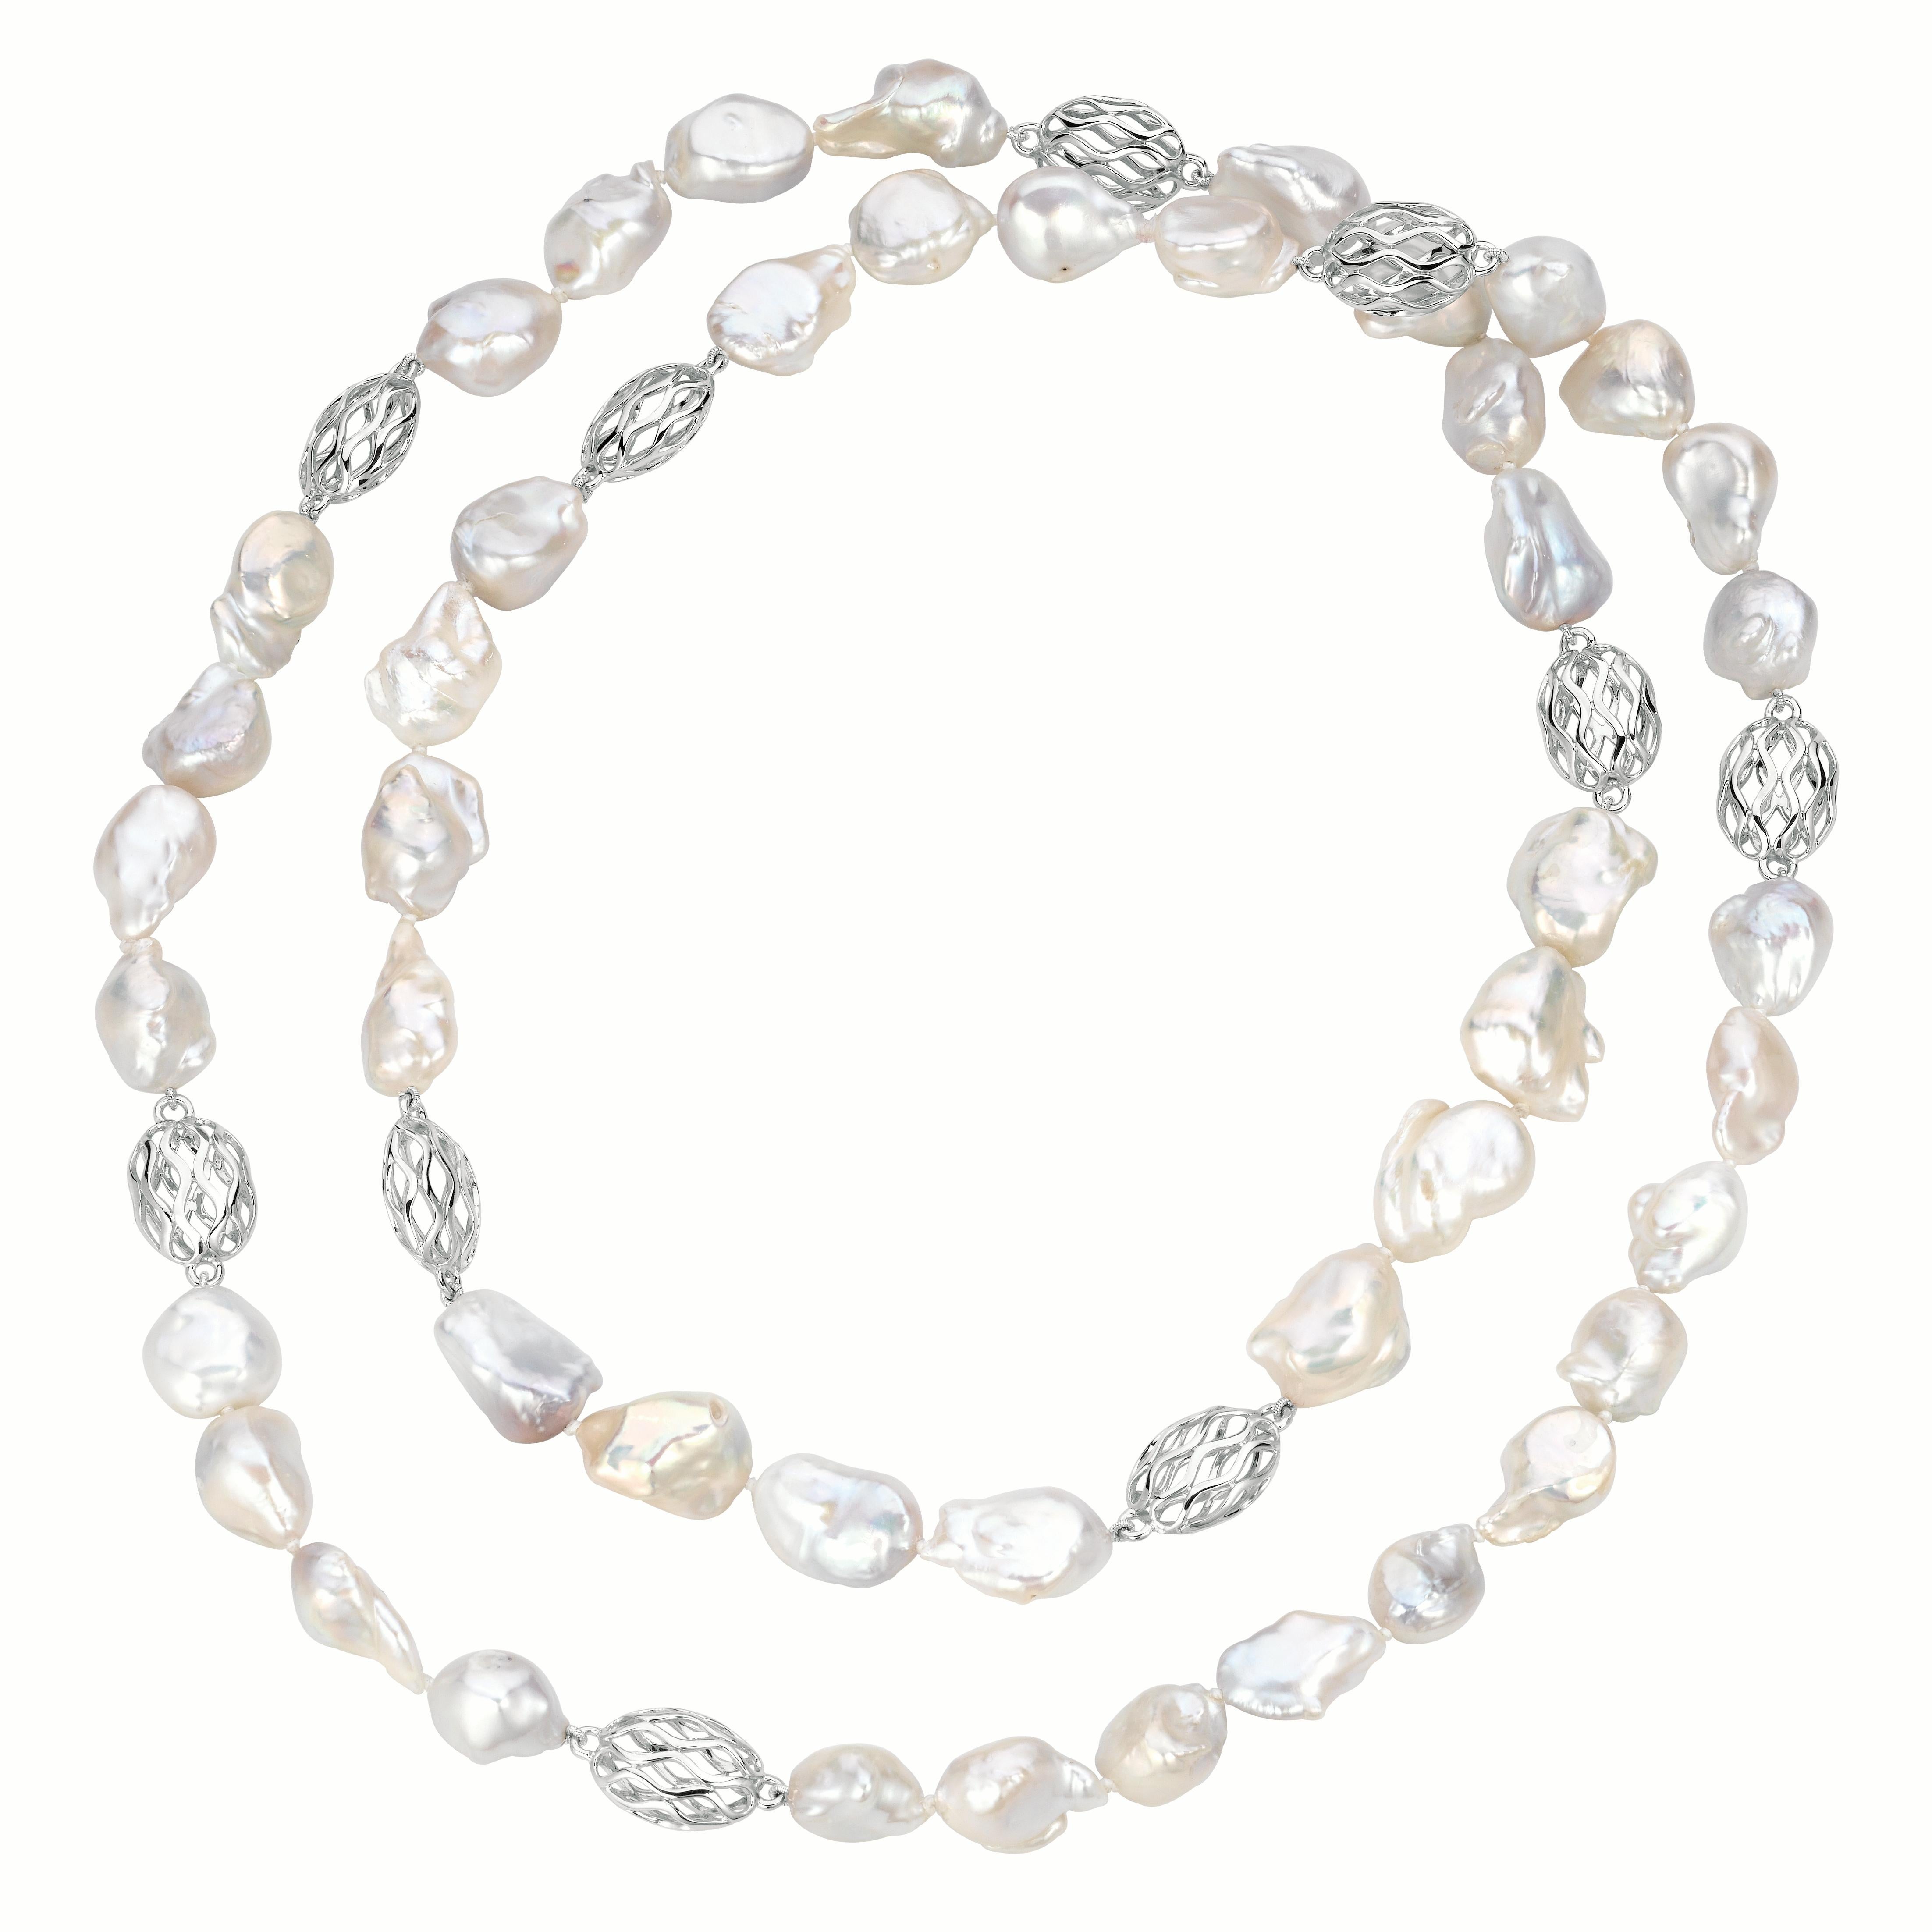 These gorgeous Baroque pearls lend themselves to be worn in a multitude of styles, long, doubled or lariat style. The design of the 18 karat white gold elements adds extra elegance to the piece. The beautiful luster of the pearls and the unique